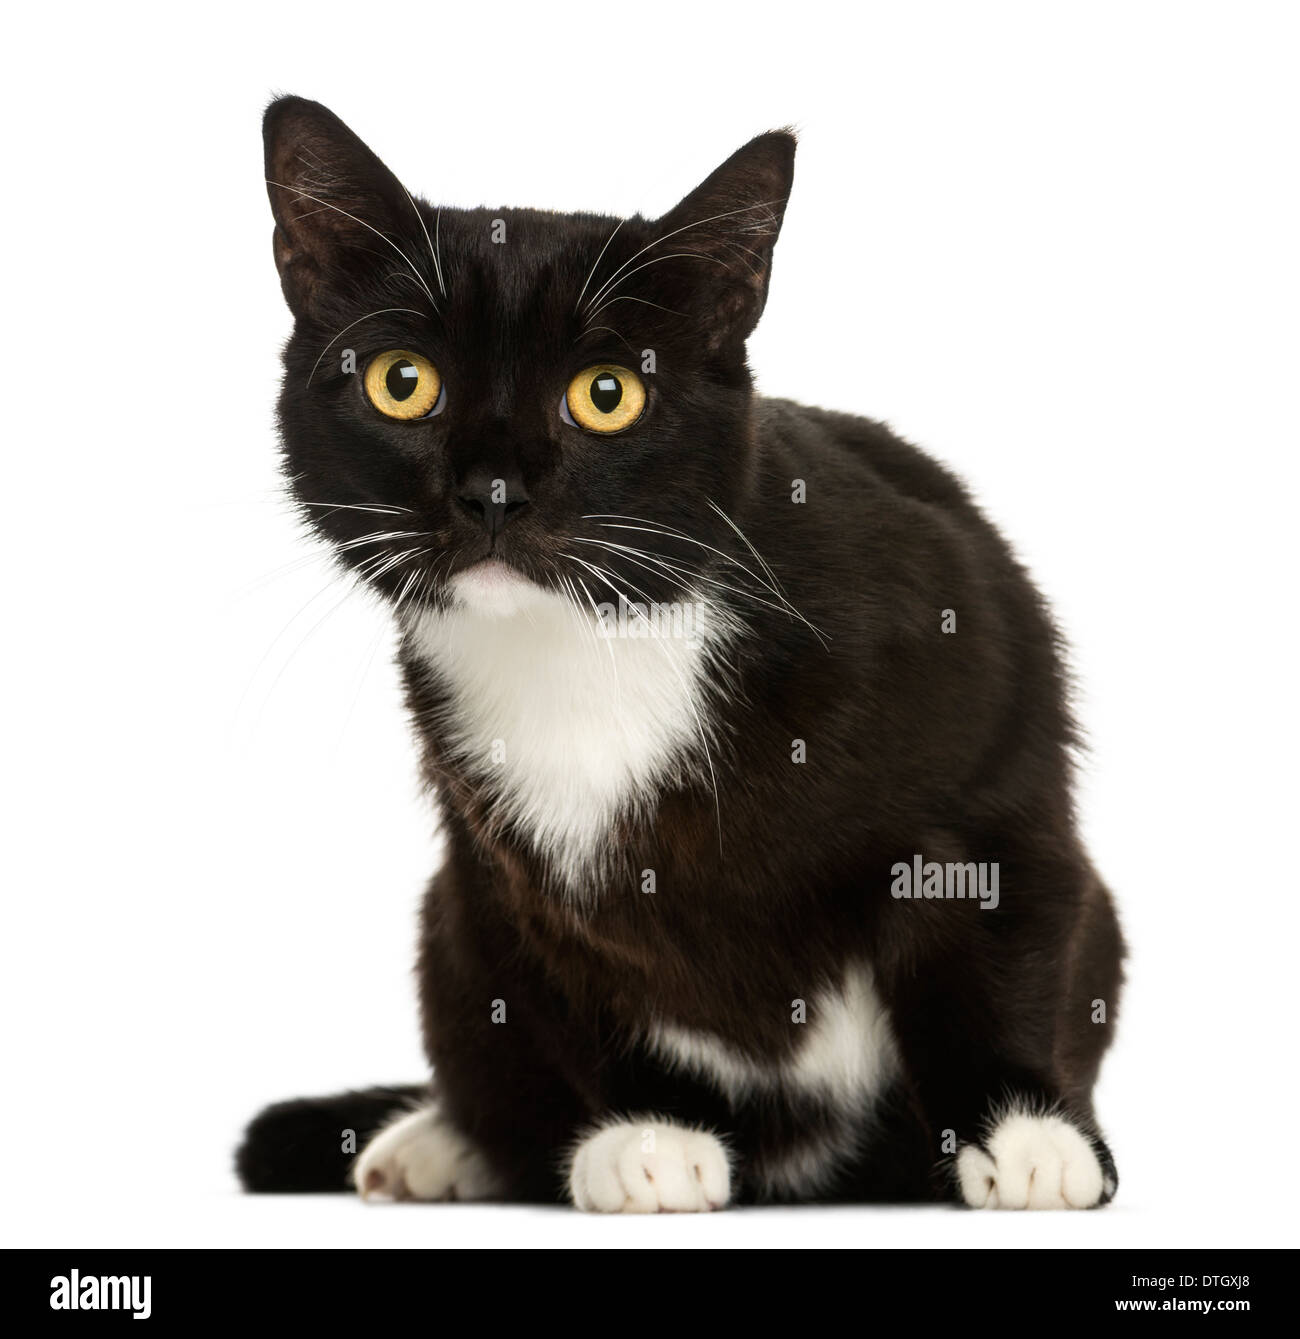 European shorthair cat sitting, looking at the camera, against white background Stock Photo